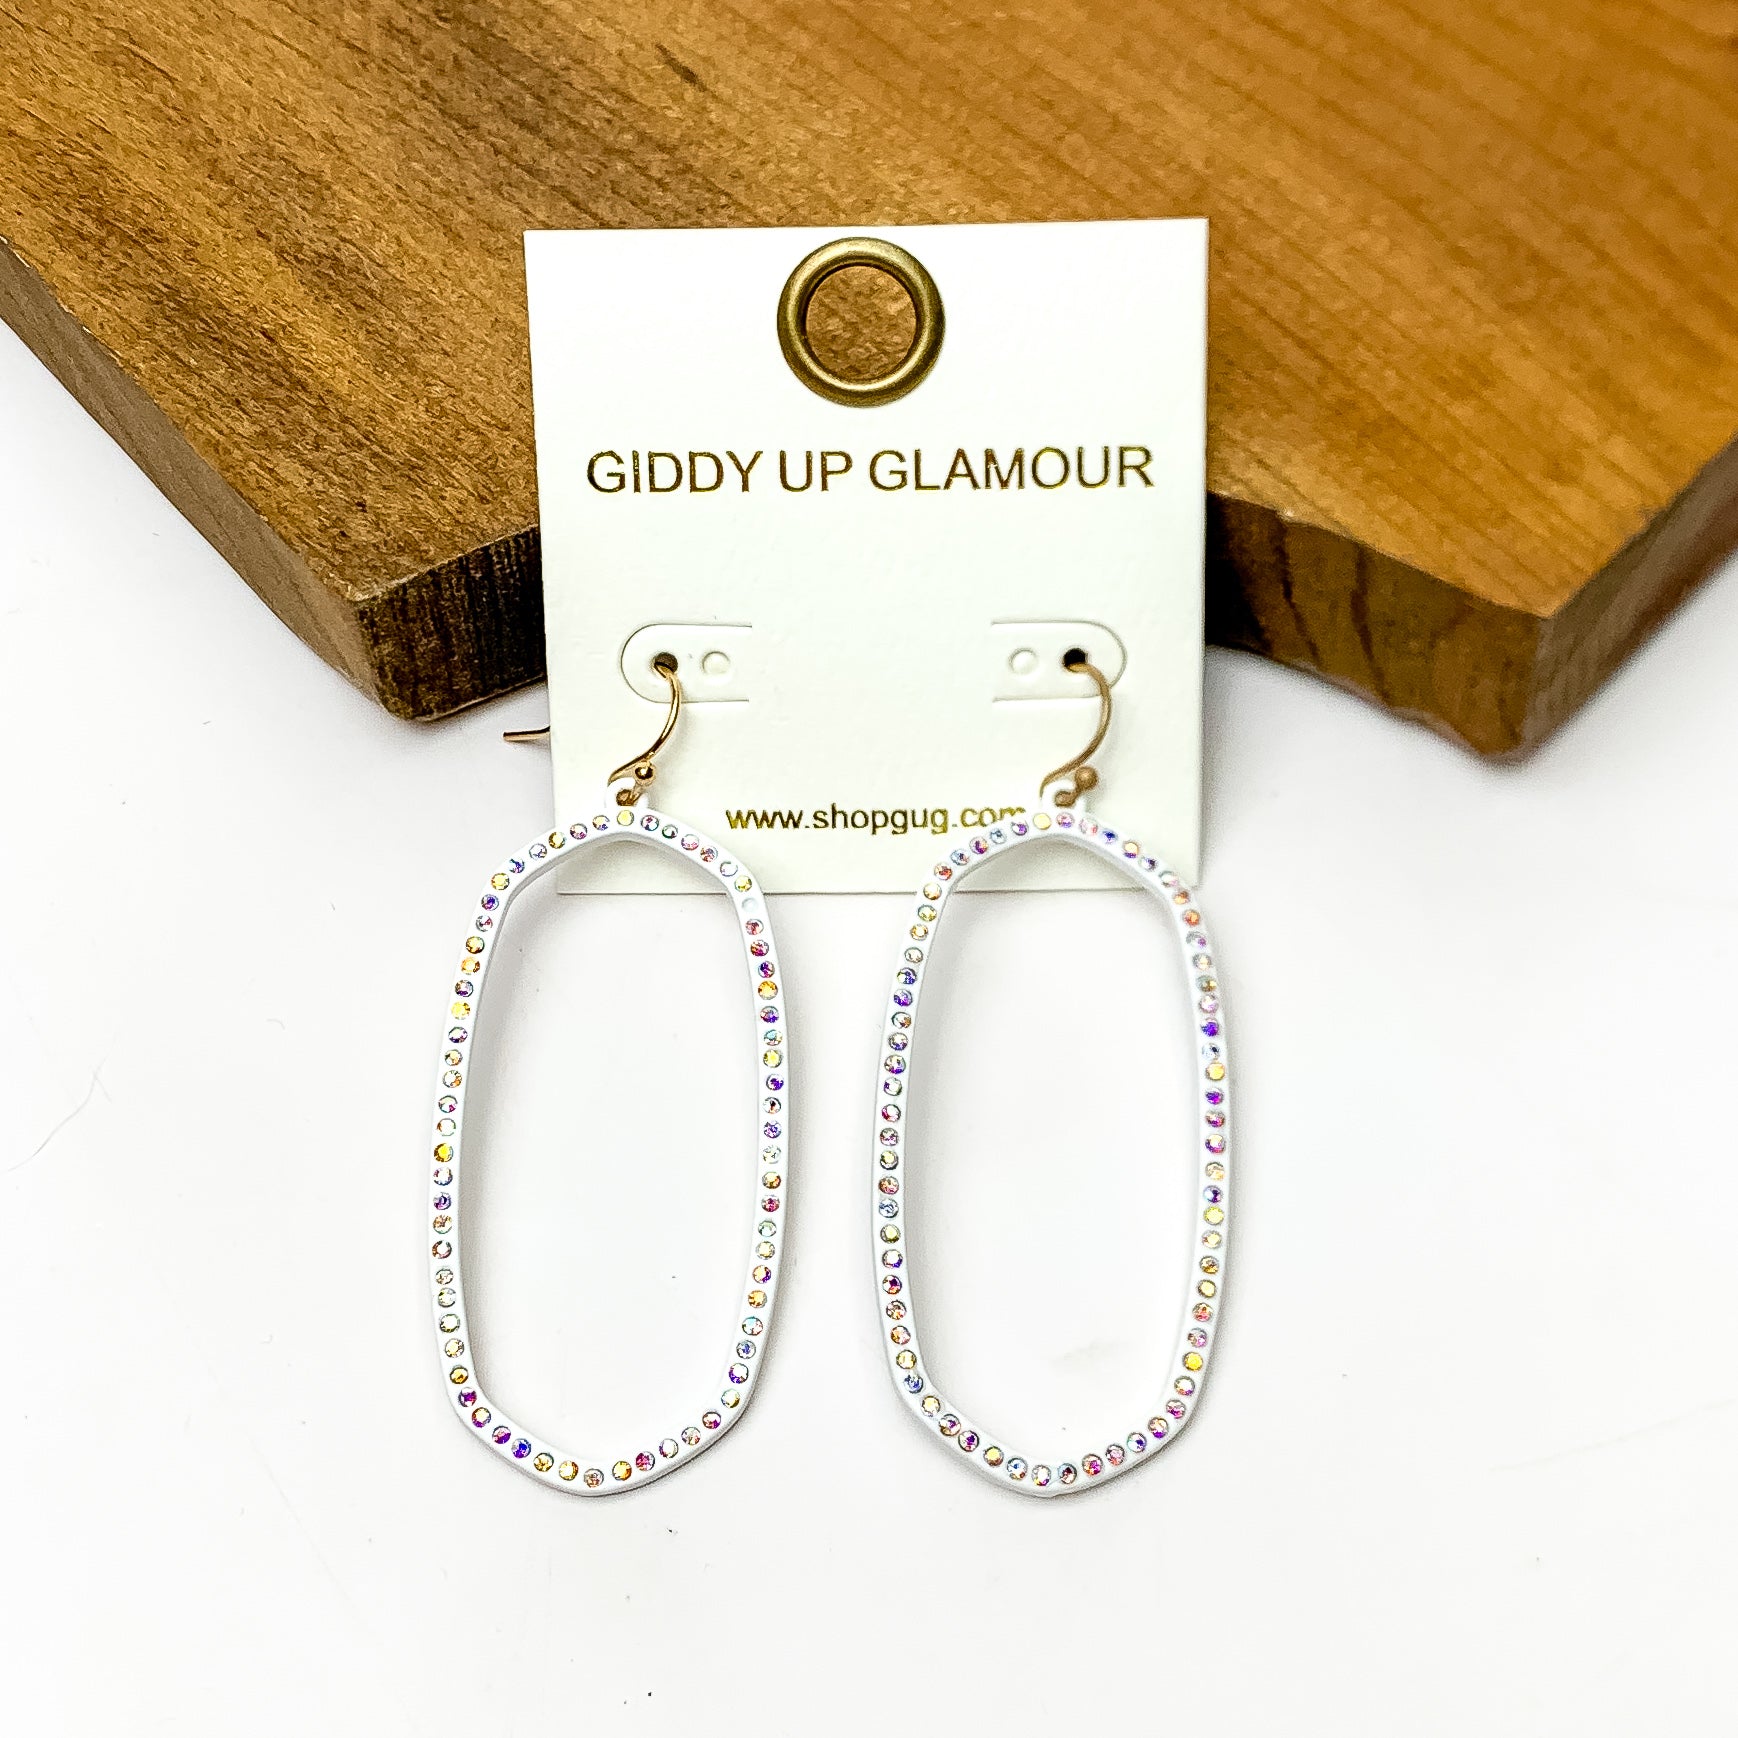 Sparkle Girl Open Oval Earrings in White. These earrings are pictured laying against a wood piece with a white background.